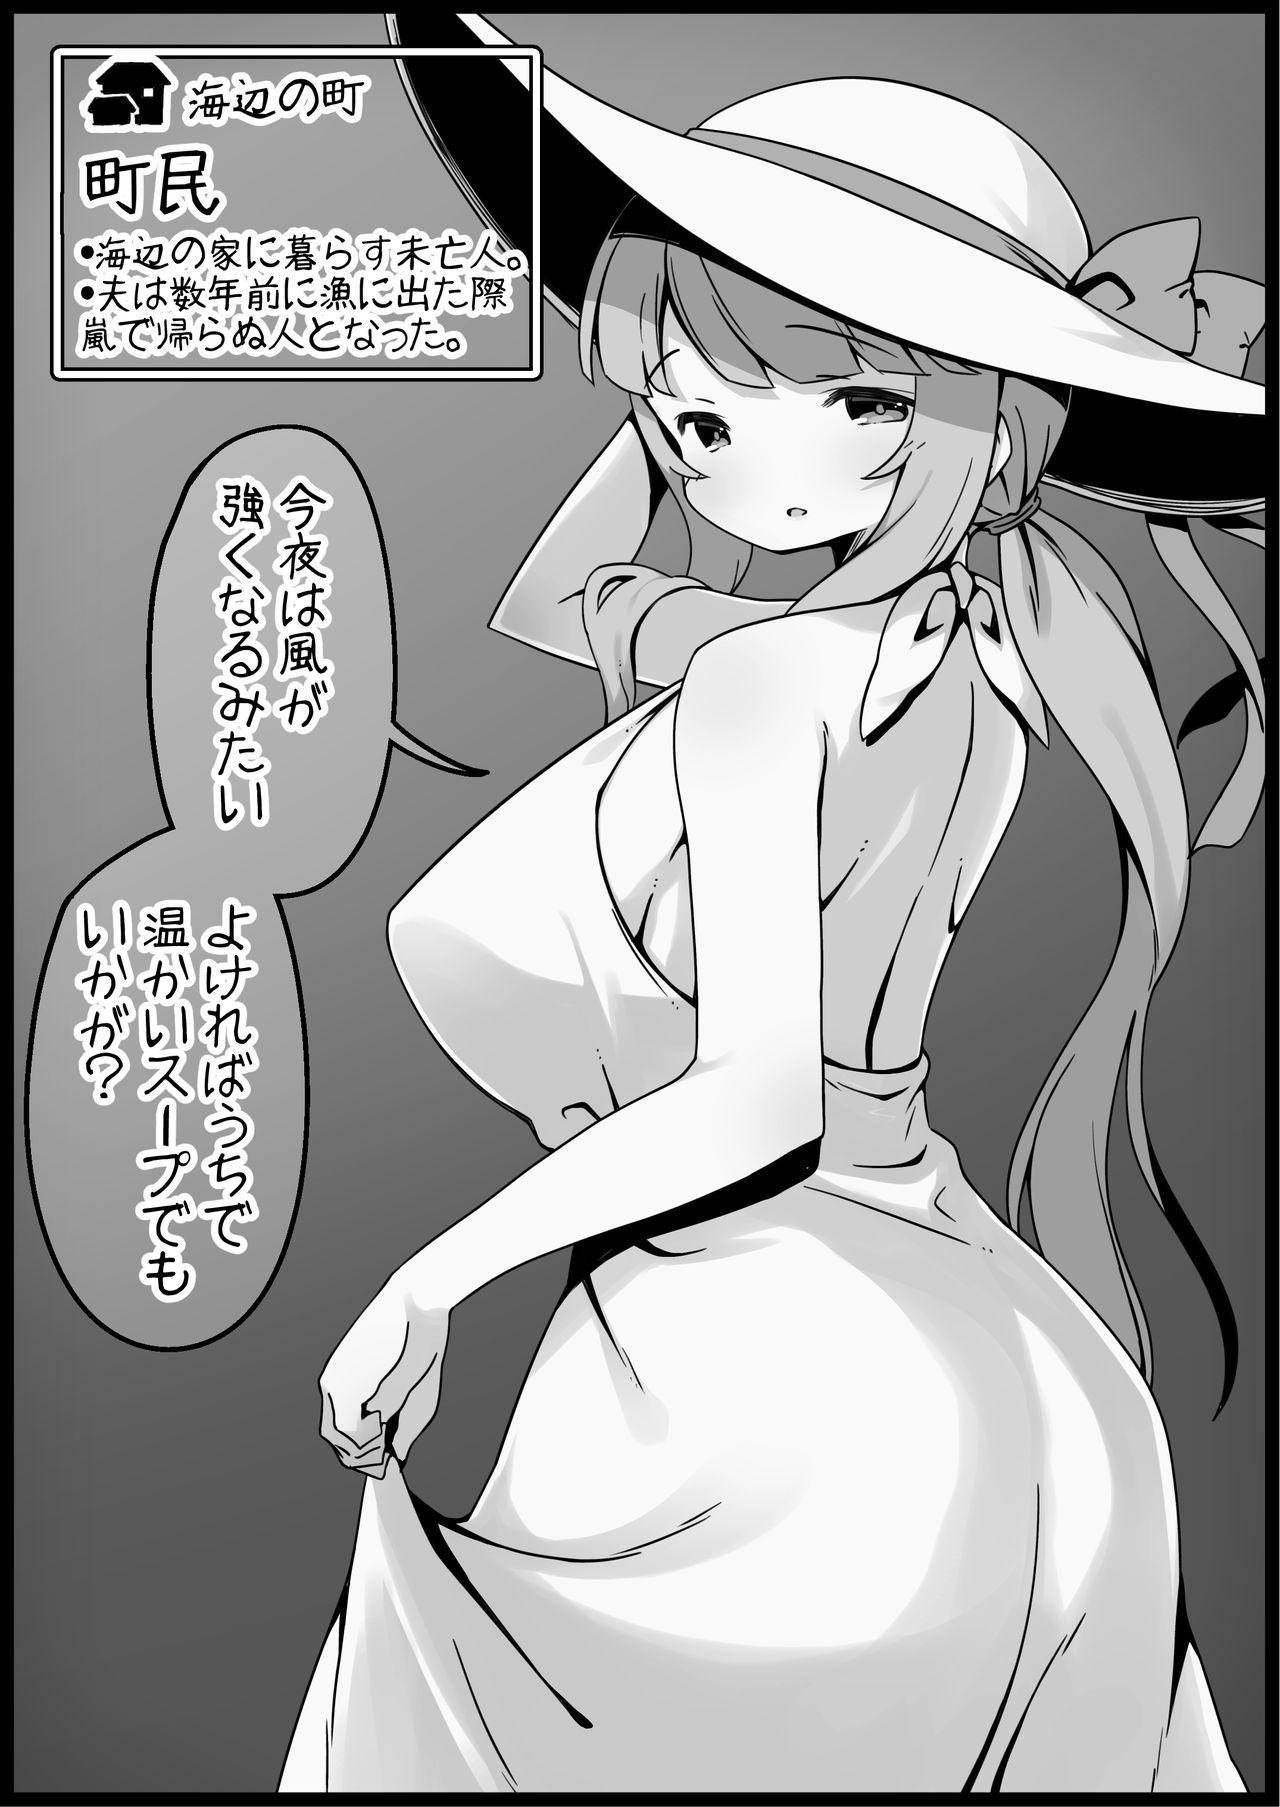 Cowgirl [Succubus Egg] Fantasy World 2 Too Forgiving to Heroes-Continued NPC (mob) Opponent-Centered Short H Manga Collection- - Original Jerking Off - Page 10